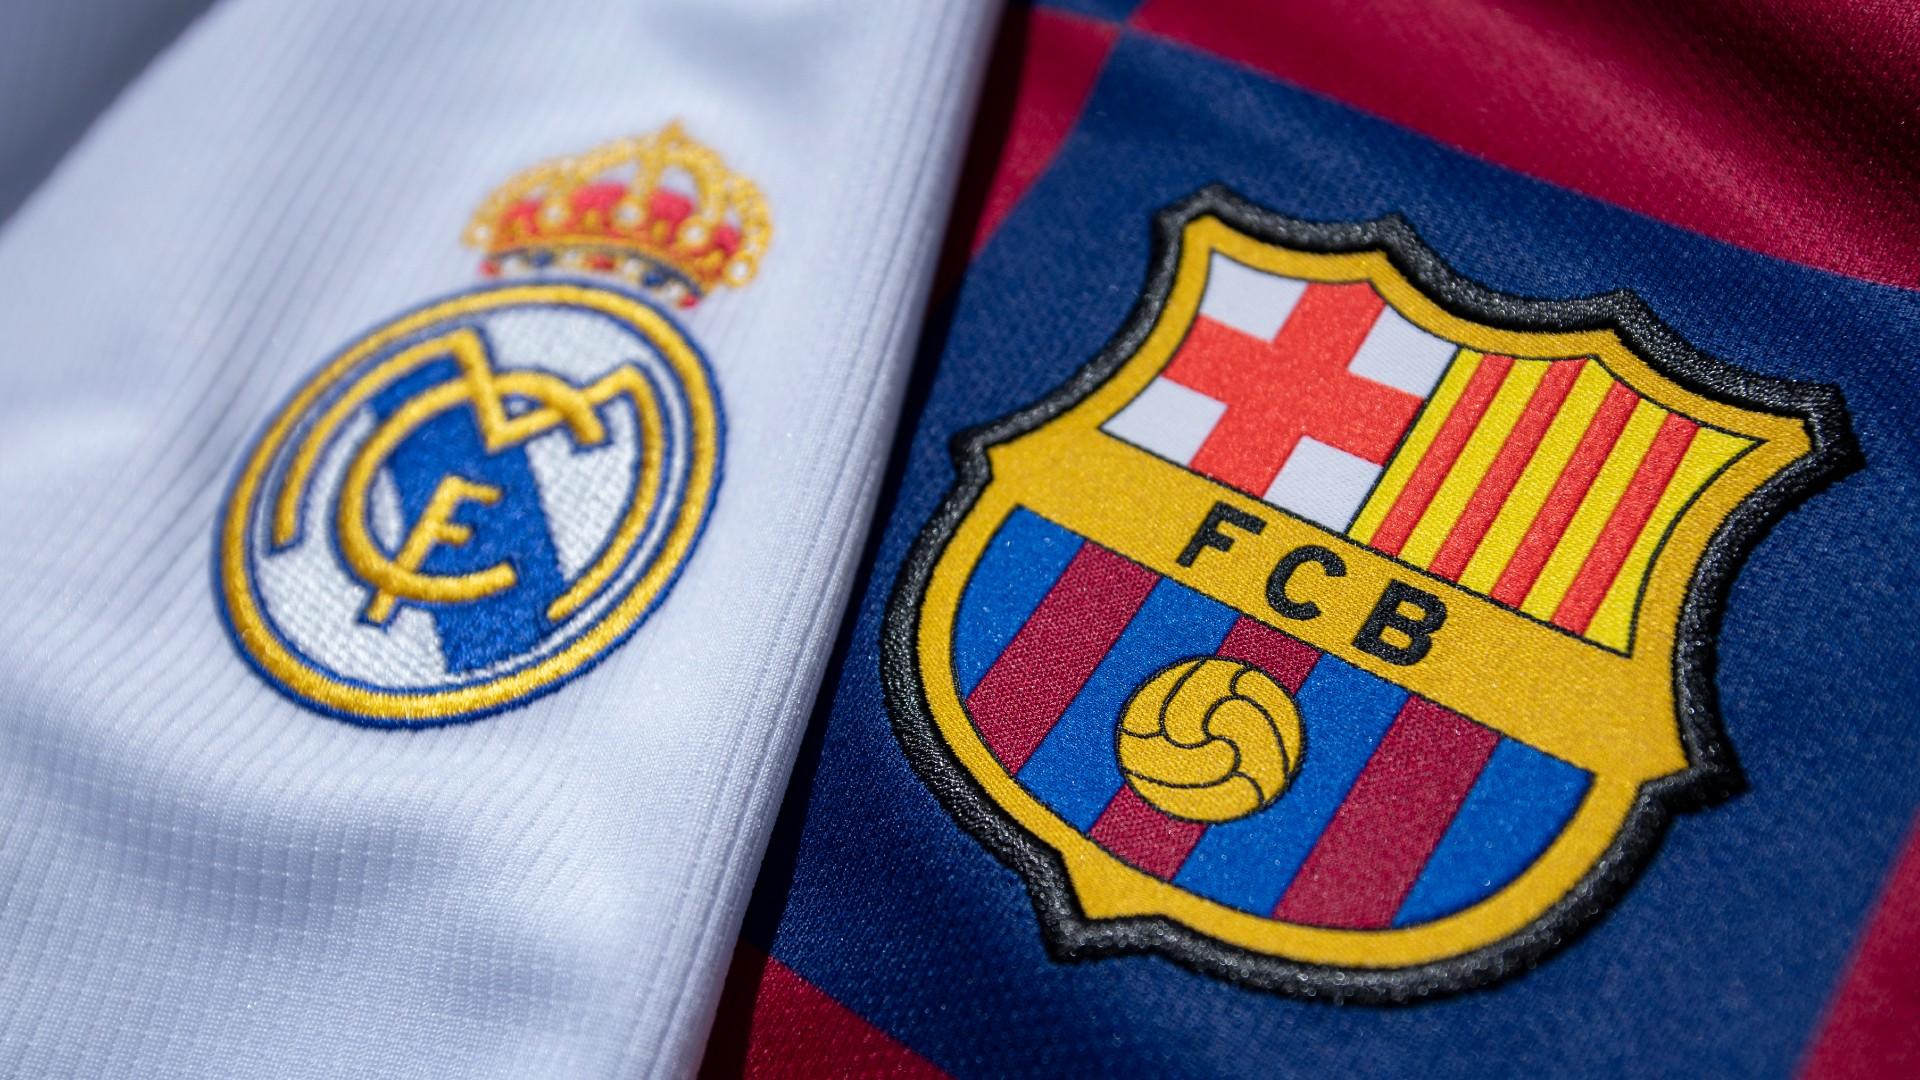 A210C90F 6C73 4A63 B7D1 777BD647CE8D - EL Clasico takes place on Sunday as this is promised to be a great game